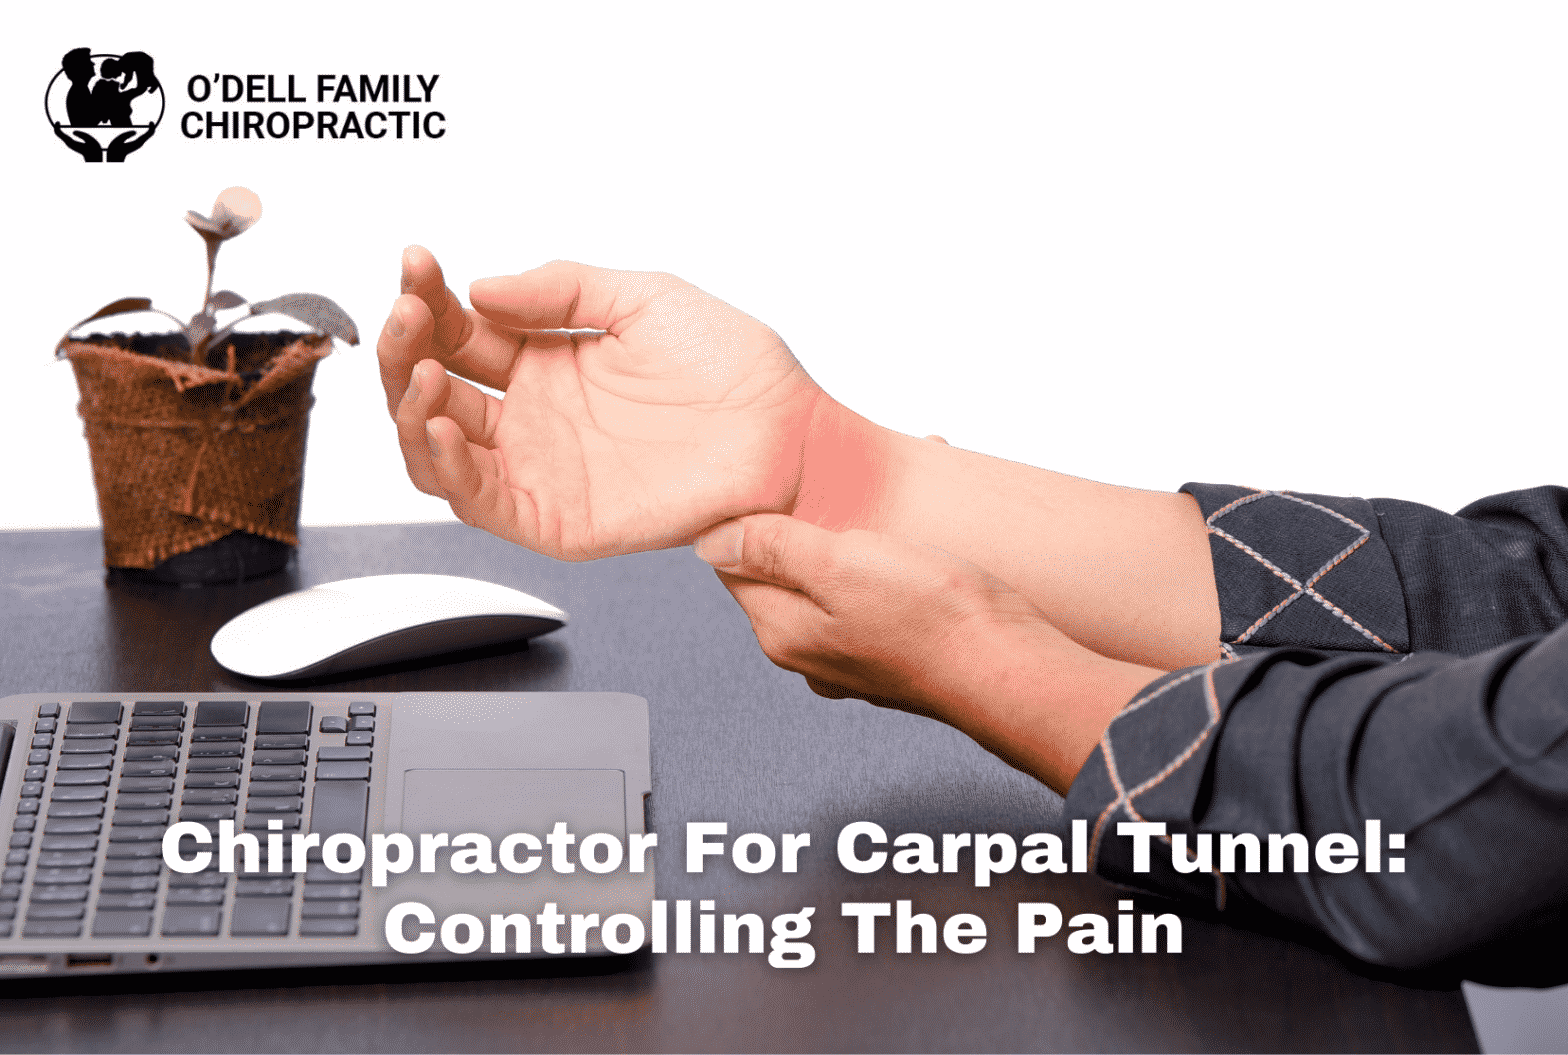 Chiropractor-For-carpal-Tunnel-Norman-O'Dell